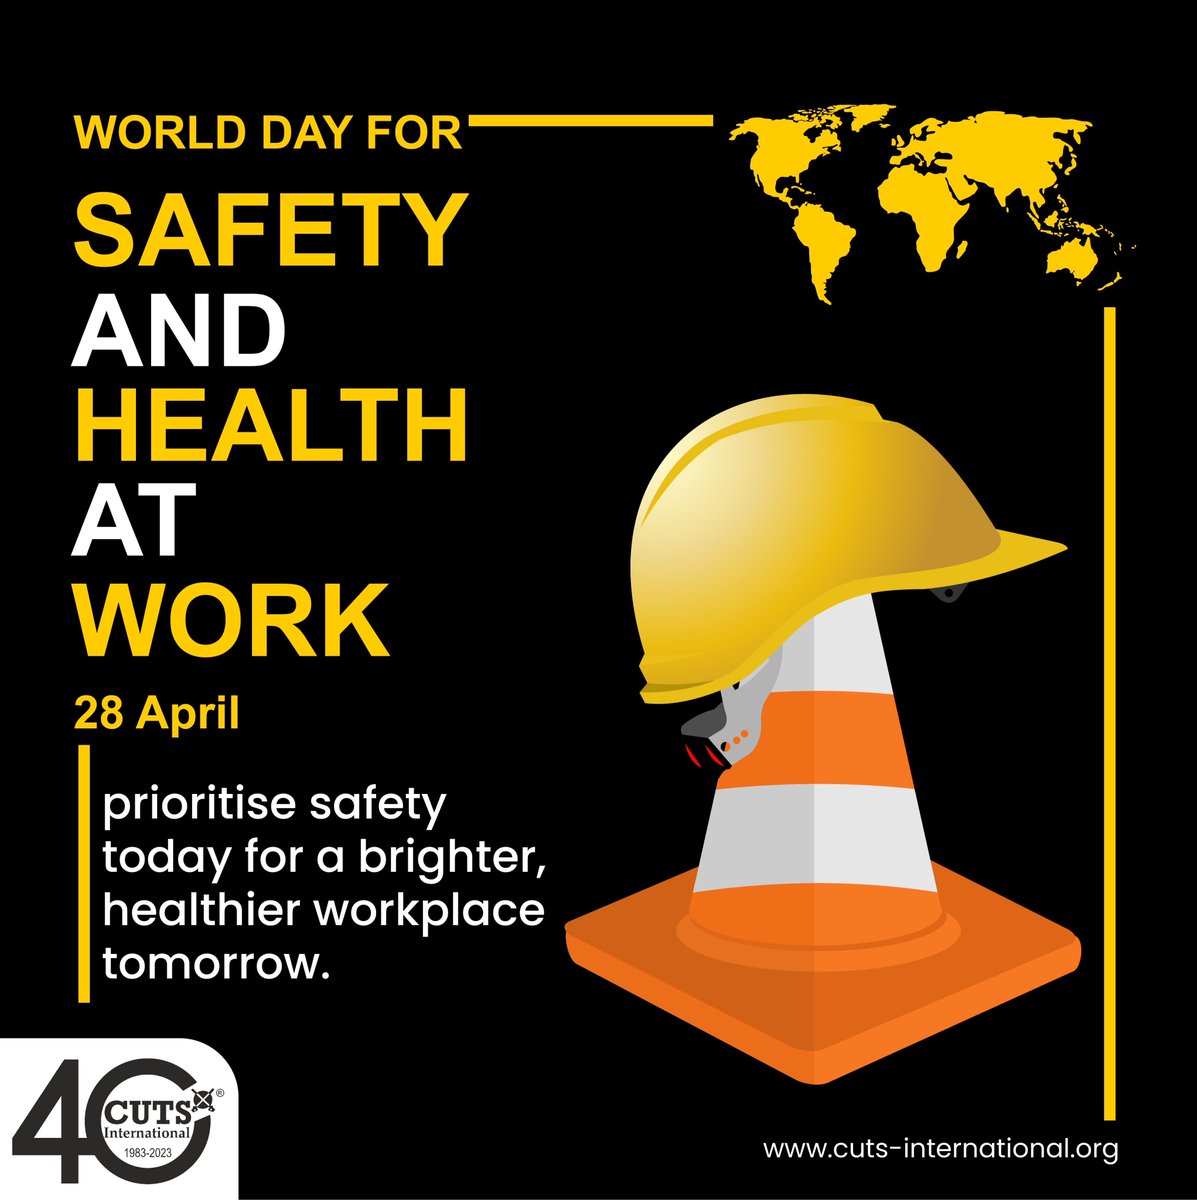 Today, let's recommit to creating a healthy and secure work environment for everyone. Together, we can prevent accidents and ensure happy, healthy employees!
#SafetyAndHealthAtWork #PreventionMatters #Safety #CUTS #CUTSInternational #healthatwork

@psm_cuts